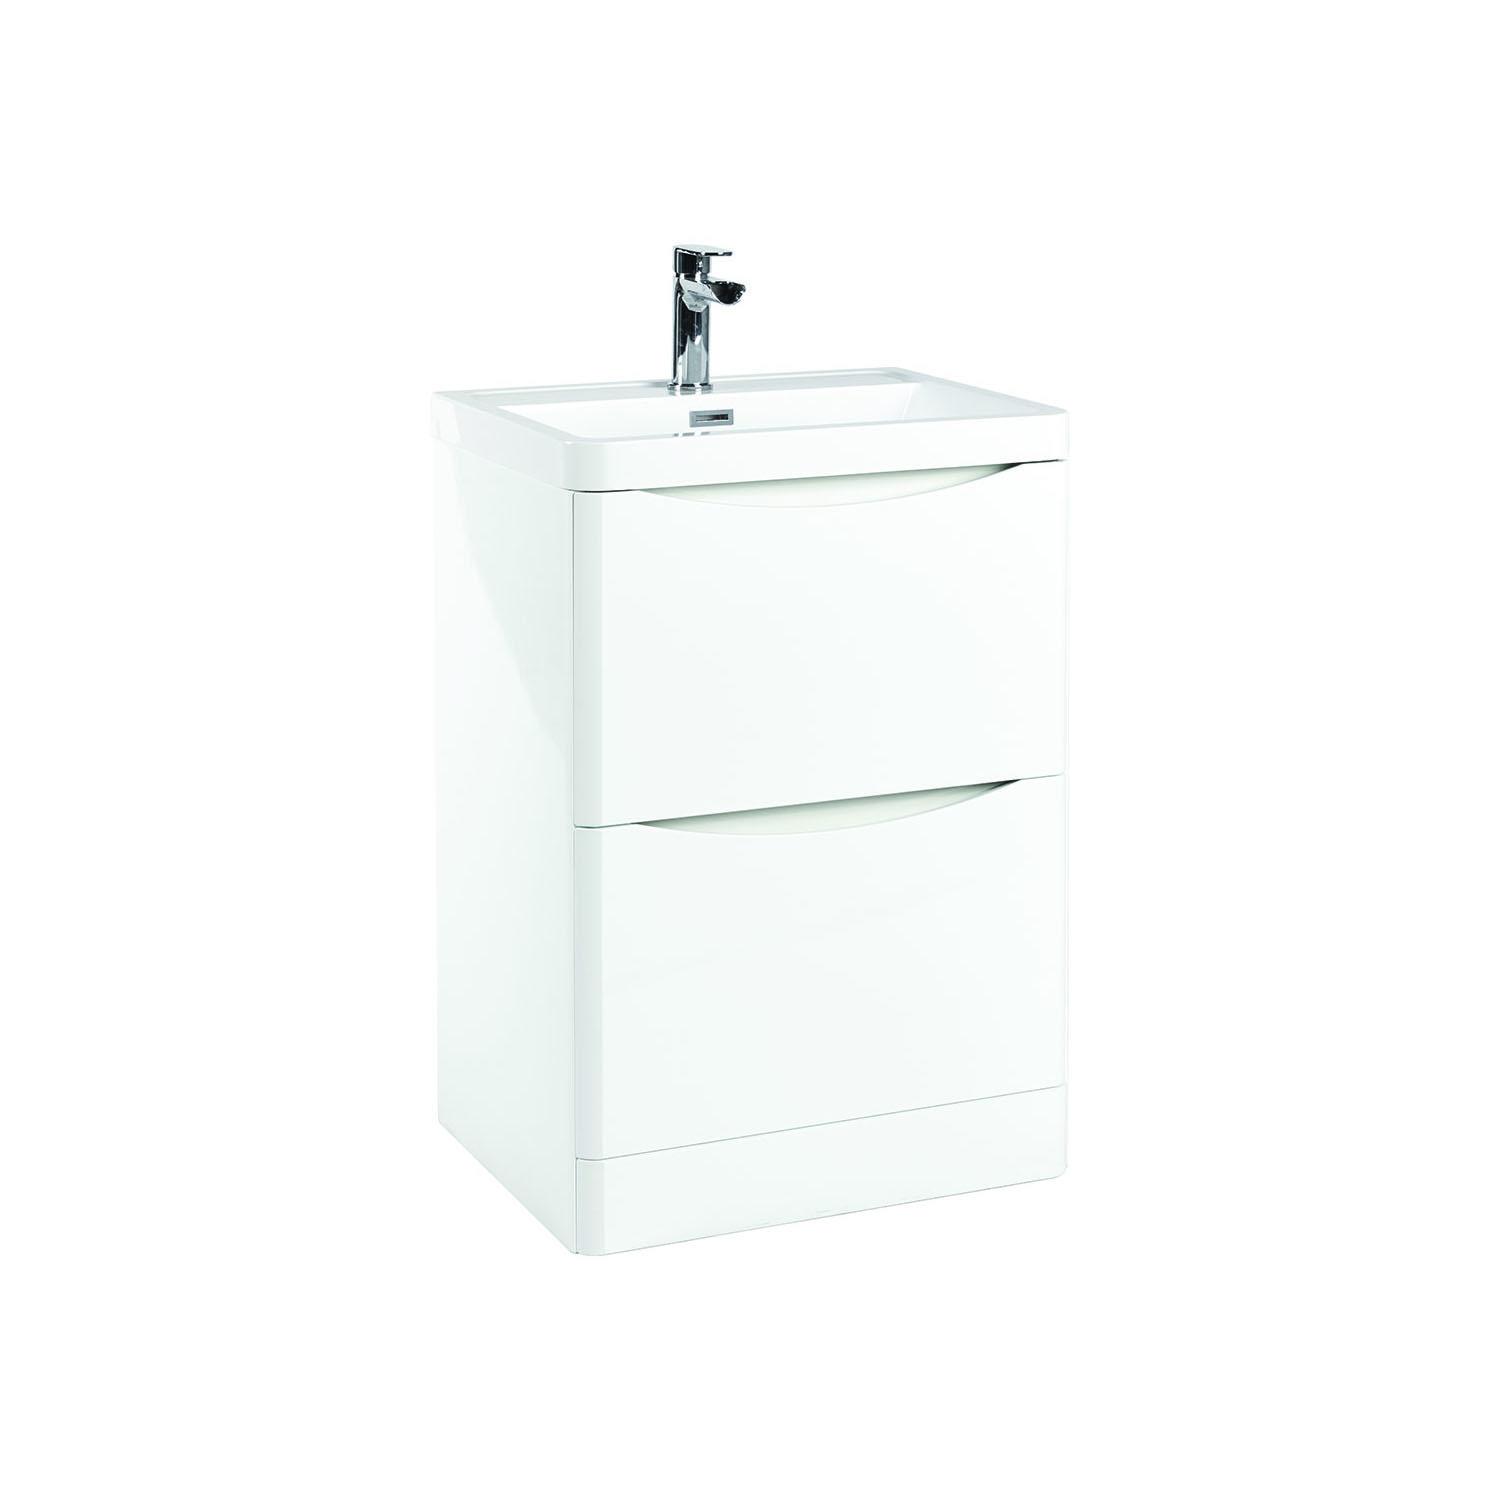 Casa Bano Contour 600 Floor Cabinet With Basin - High Gloss White